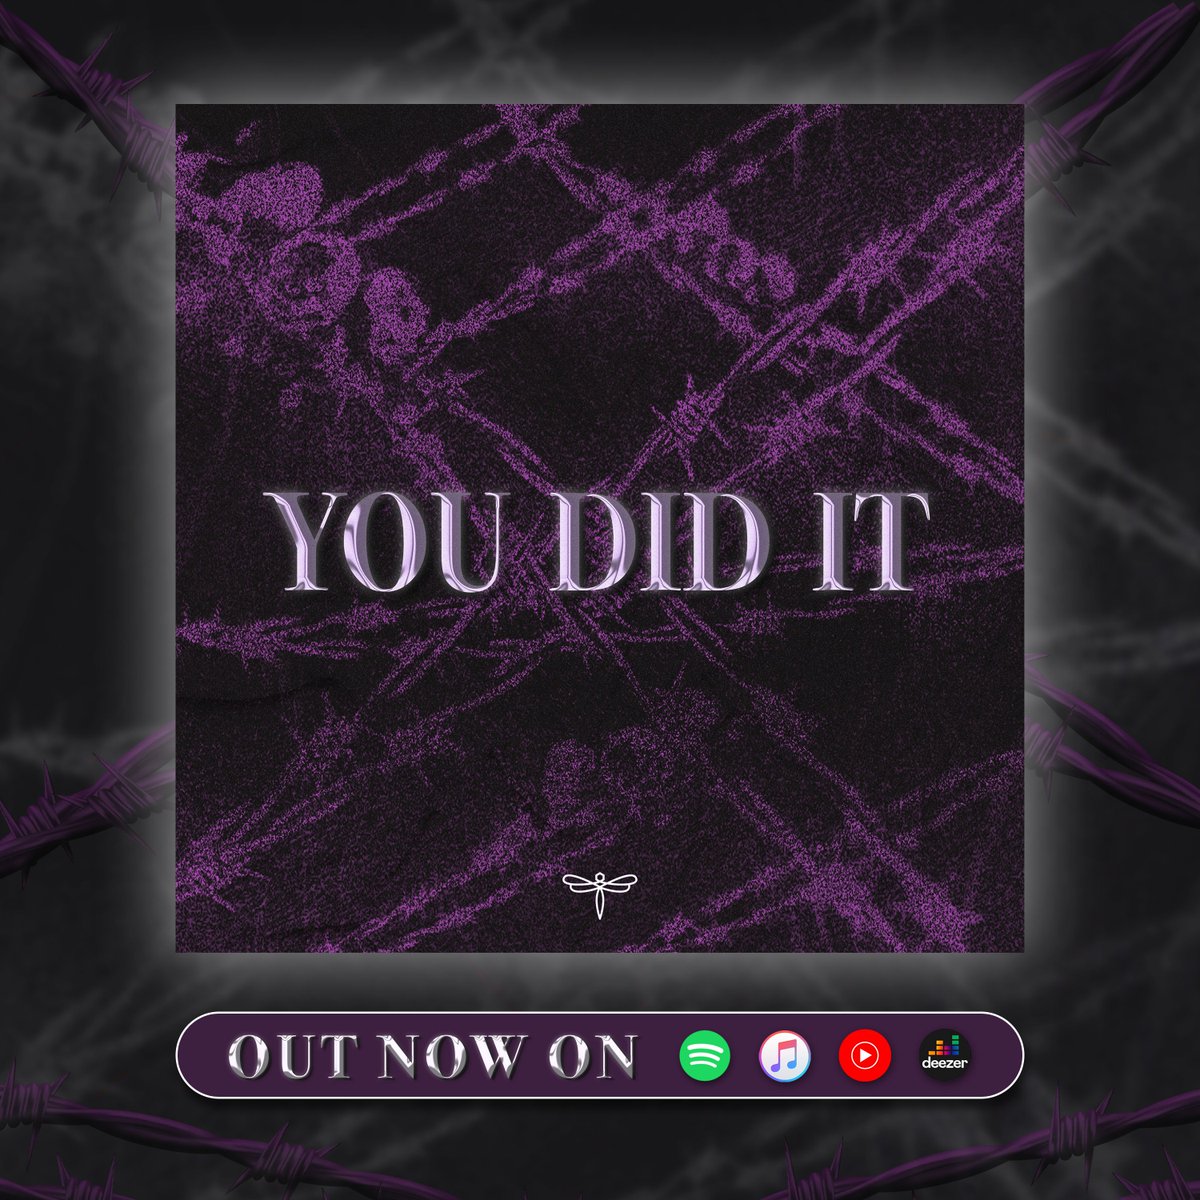 [YOU DID IT] ‘YOU DID IT’ is OUT NOW on all digital streaming platforms worldwide 💜 kaia.tunelink.to/you-did-it YDI OUT NOW #KAIA #YOUDIDIT #YOUDIDITOUTNOW